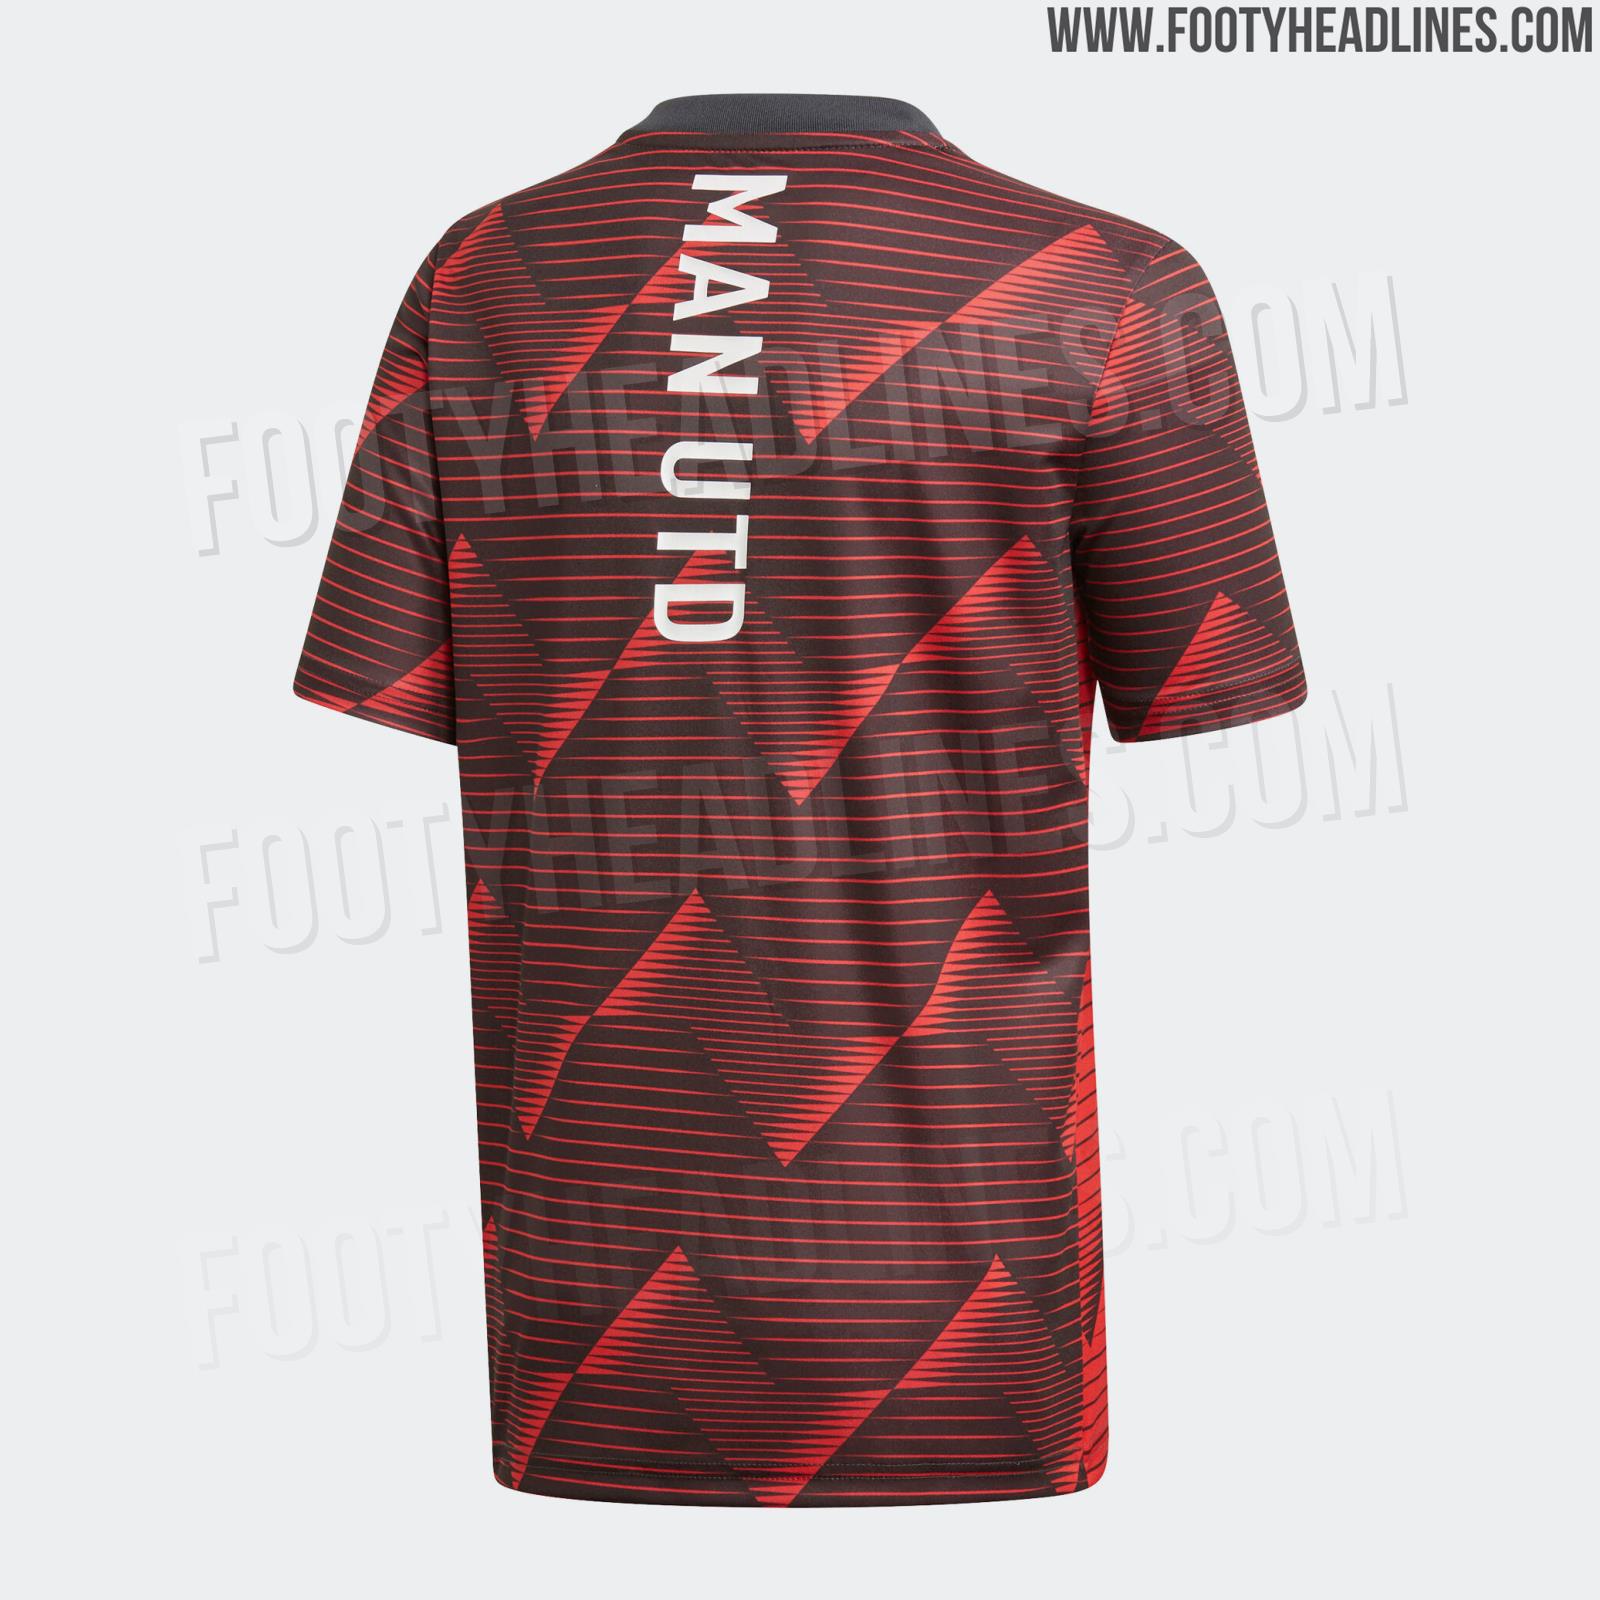 Manchester United 2020 Pre-Match Kit Leaked - Footy Headlines